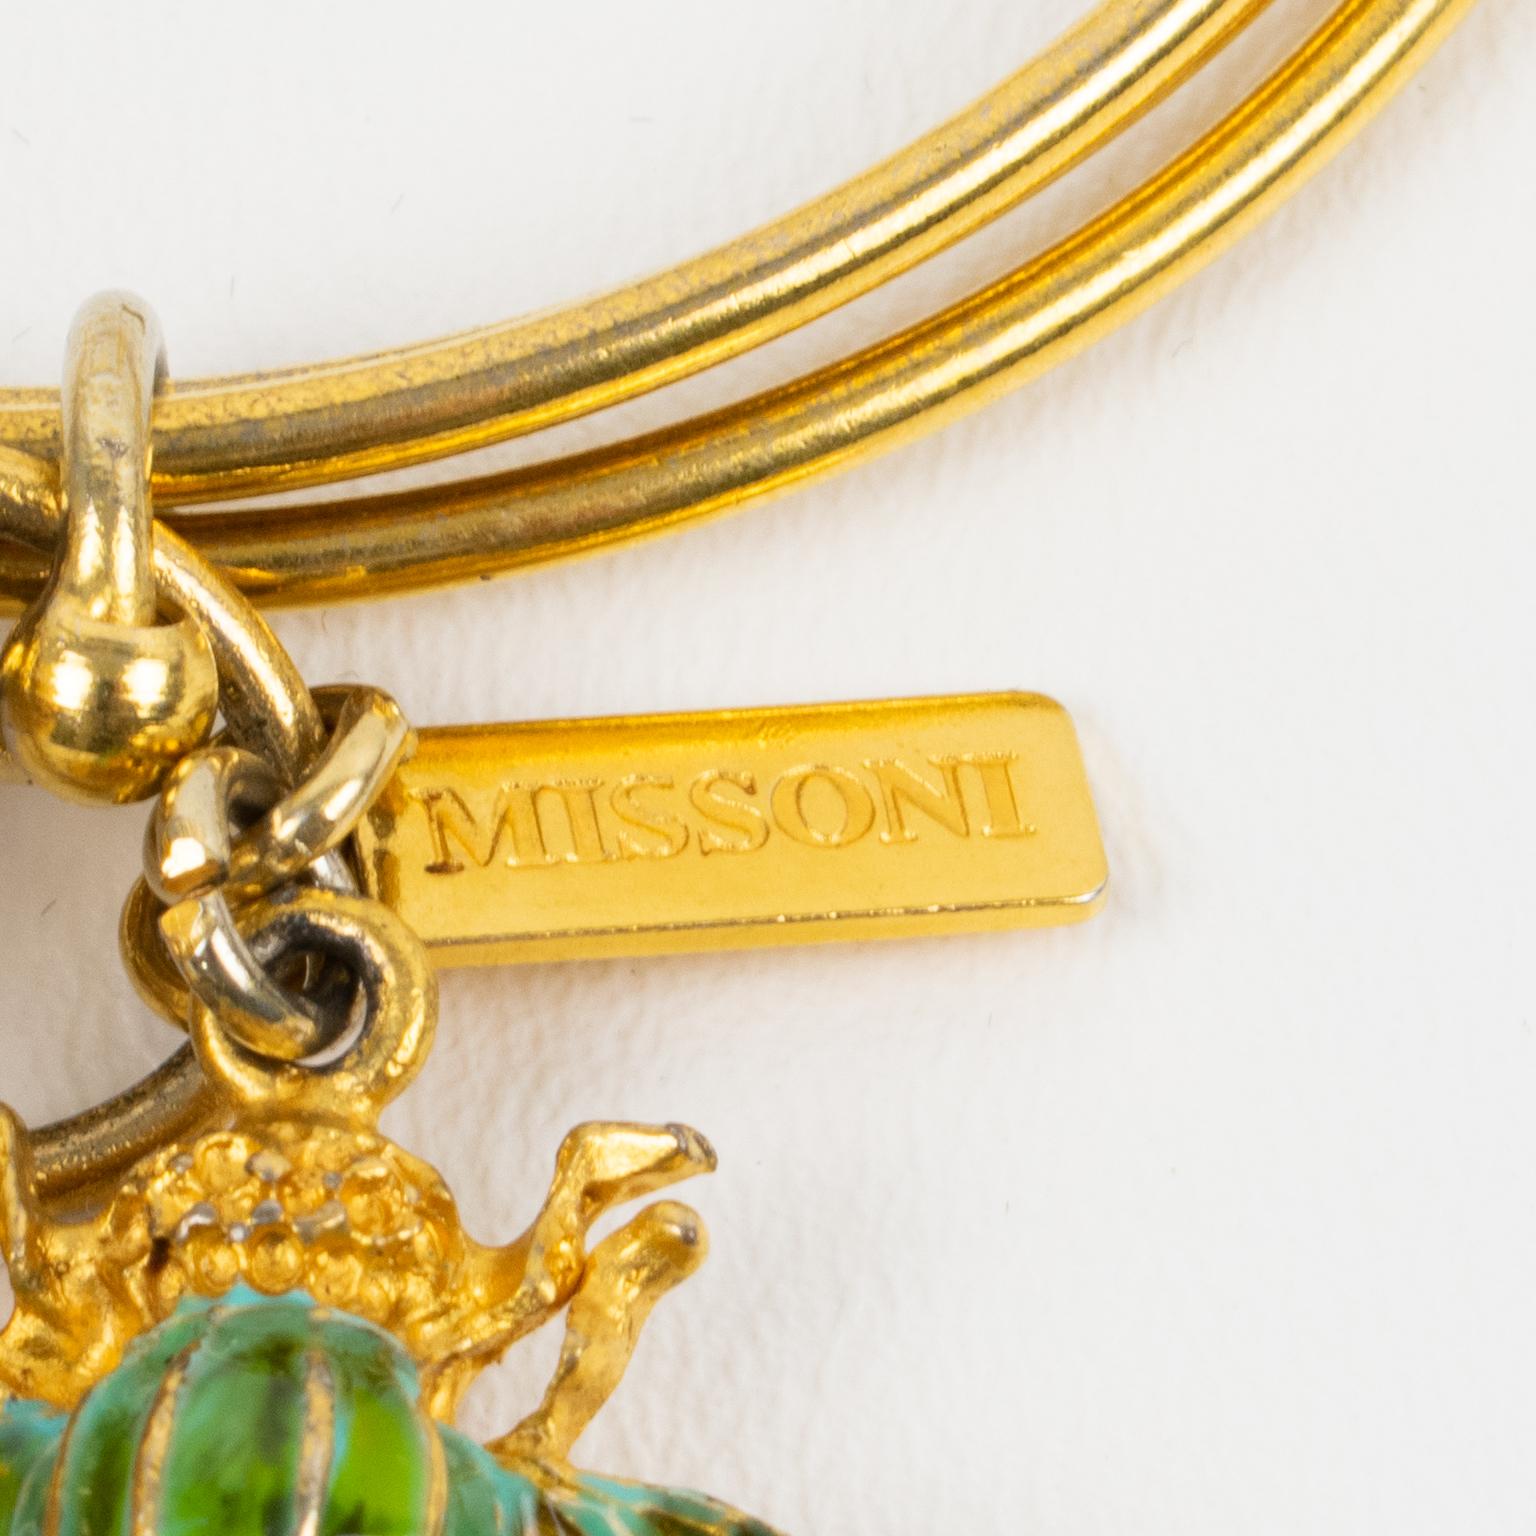 Missoni Italy Gilded Metal Bangle Bracelet with Enamel Dangling Charms 3